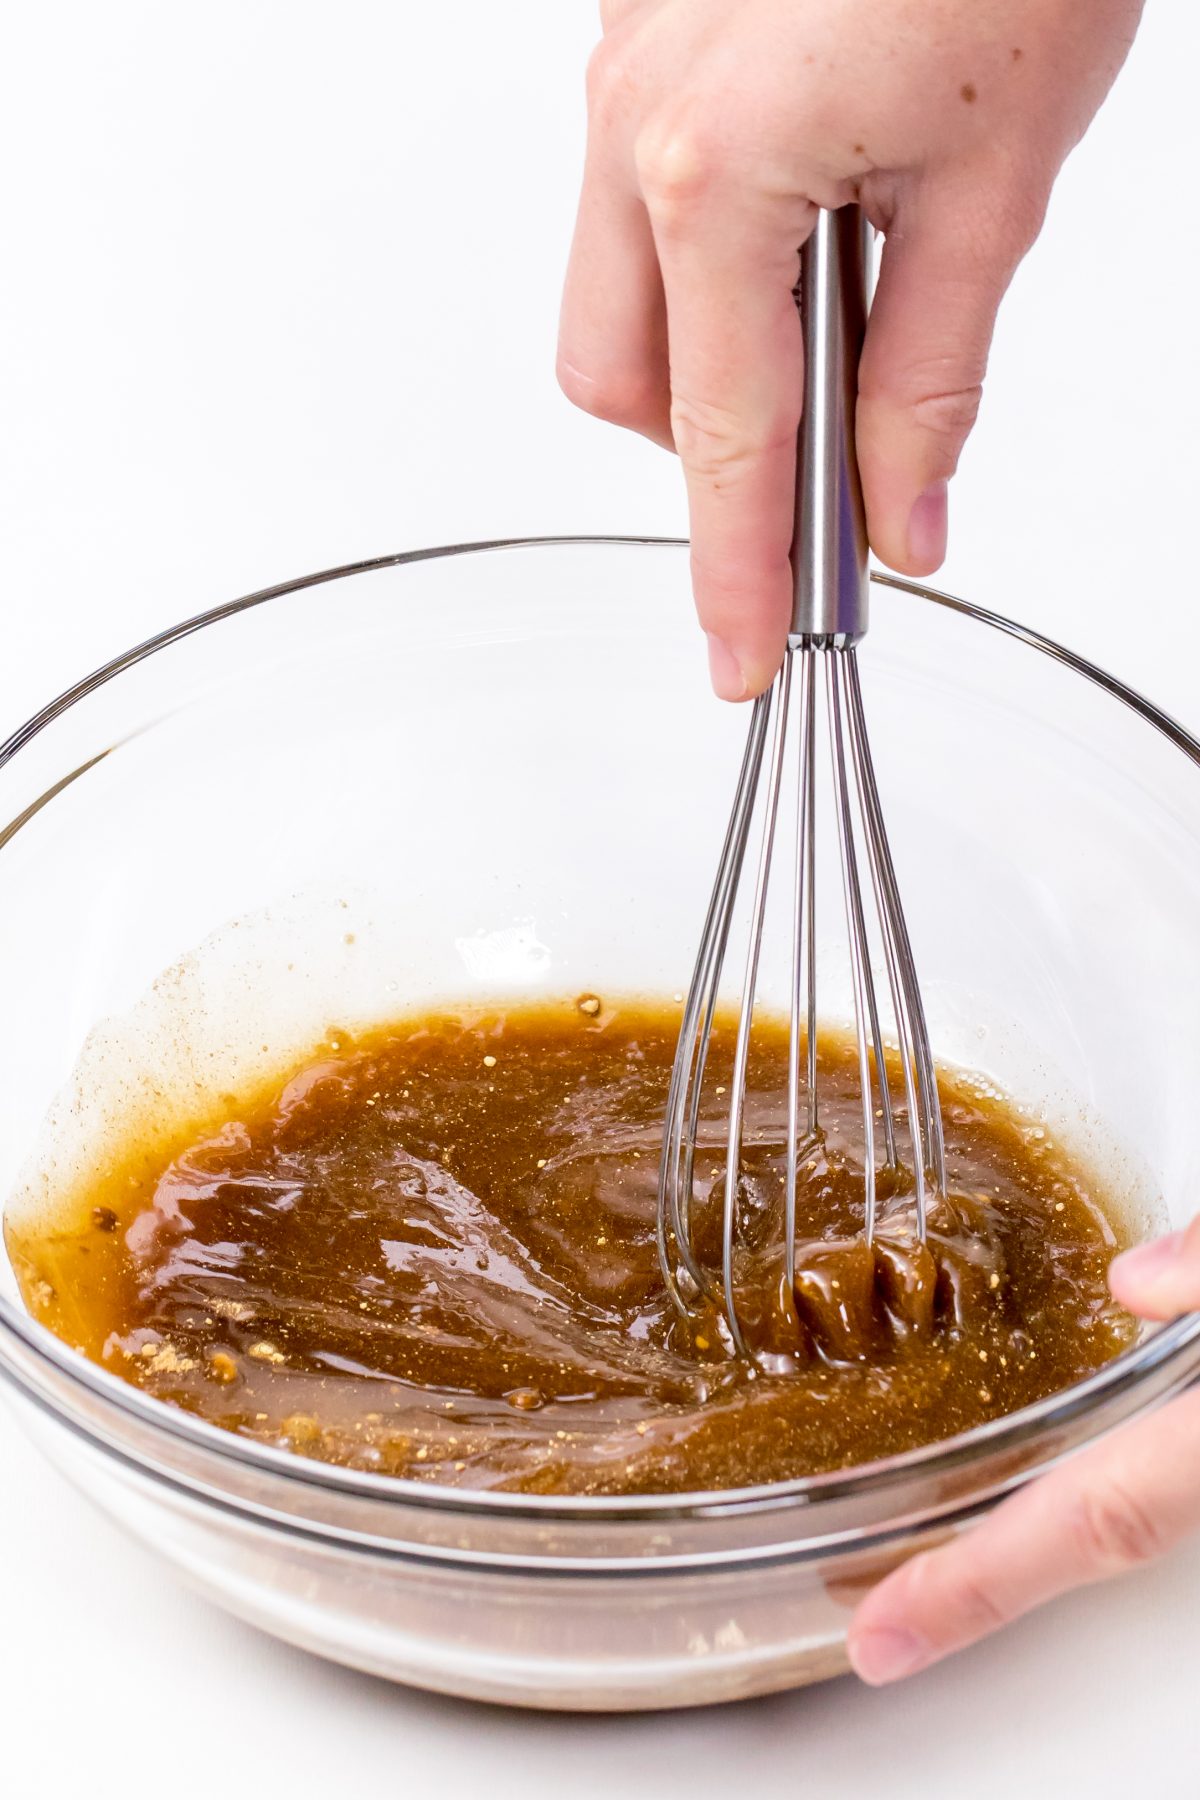 Whisk sauce mixture together